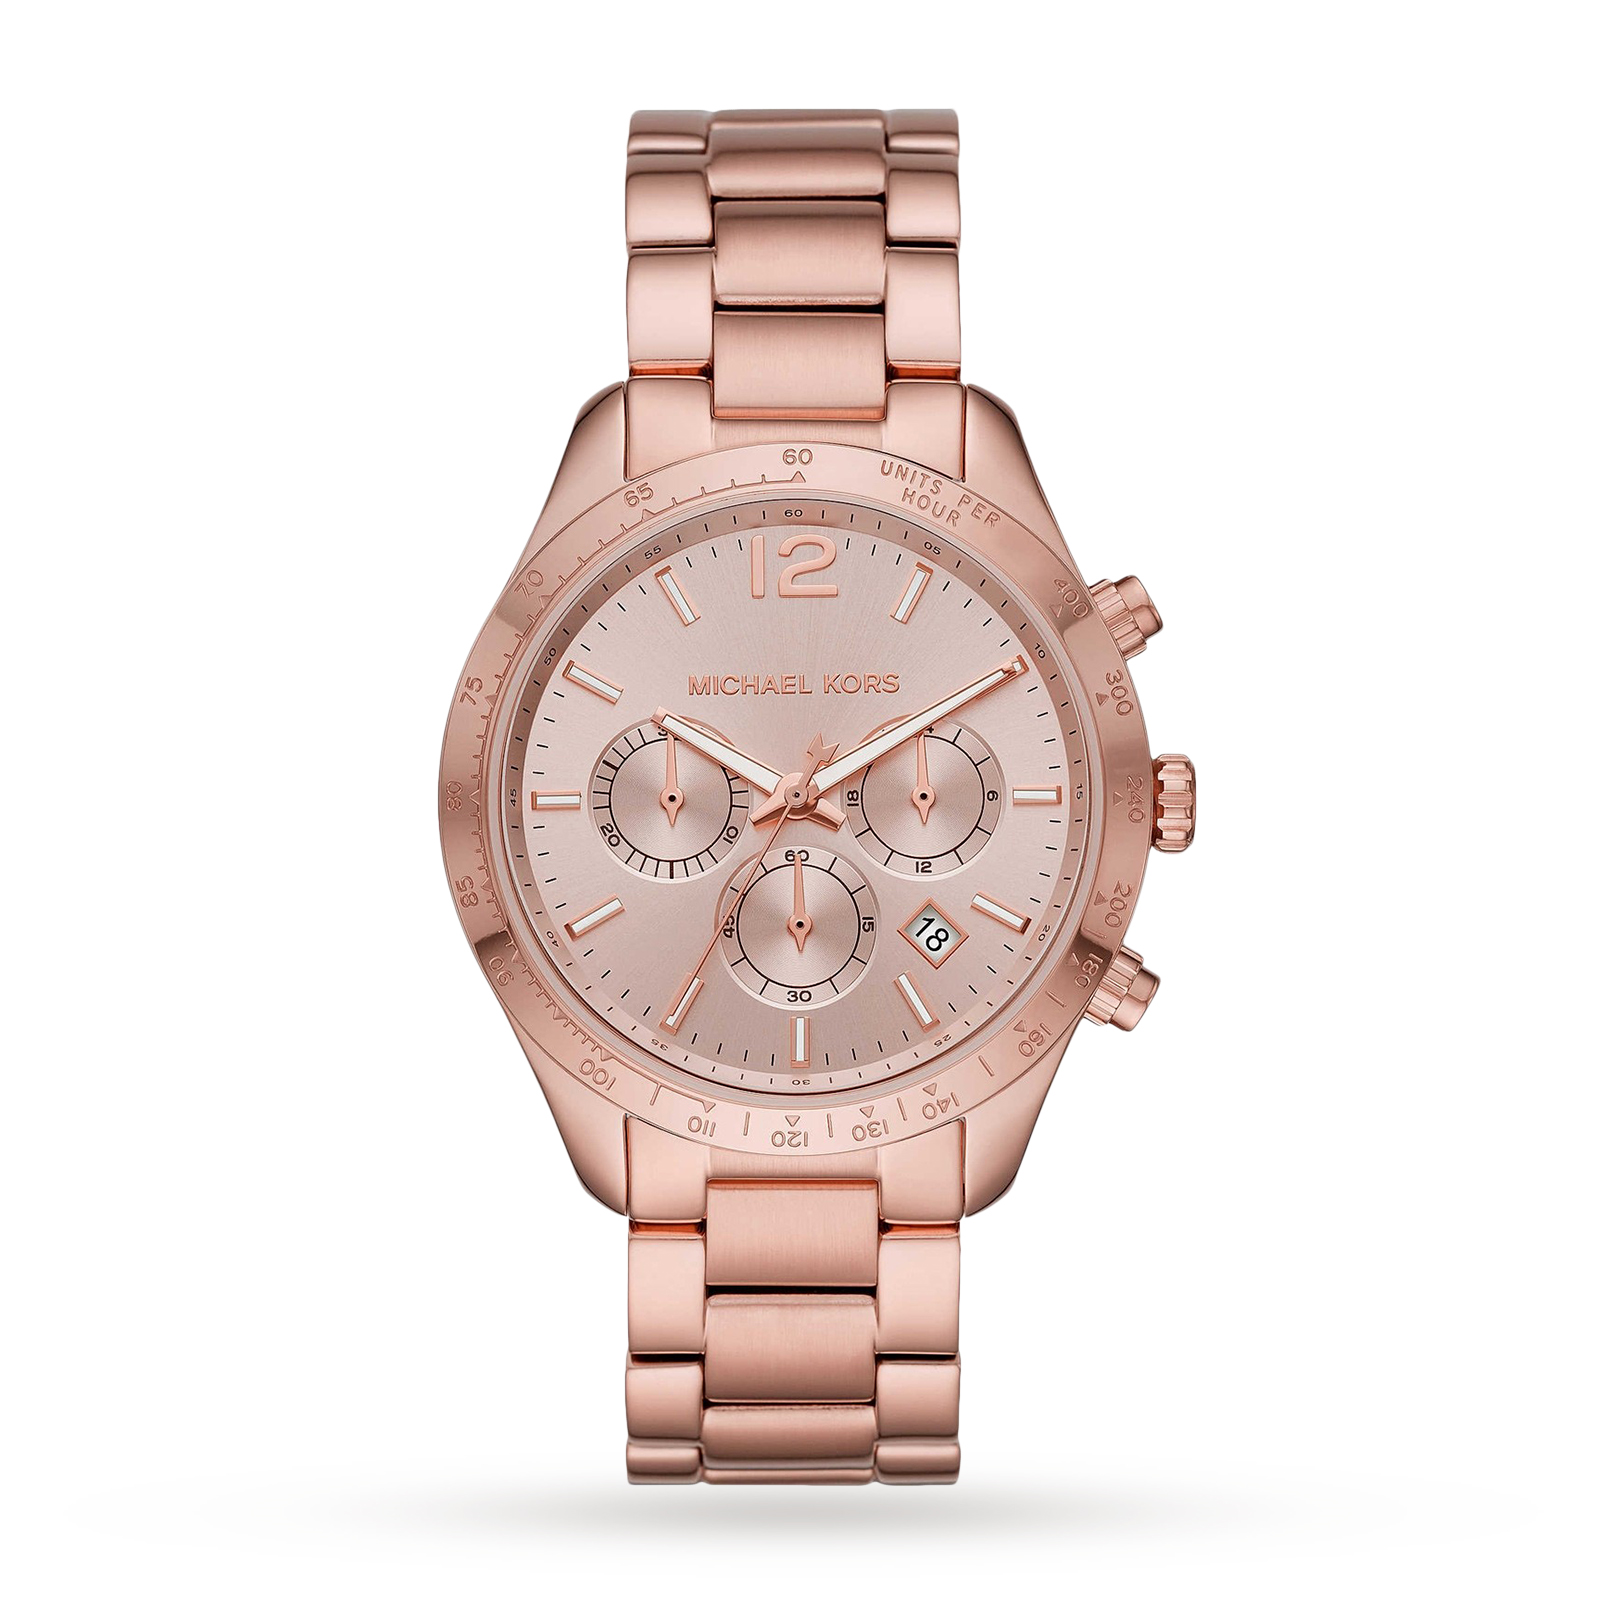 michael kors his and hers watches